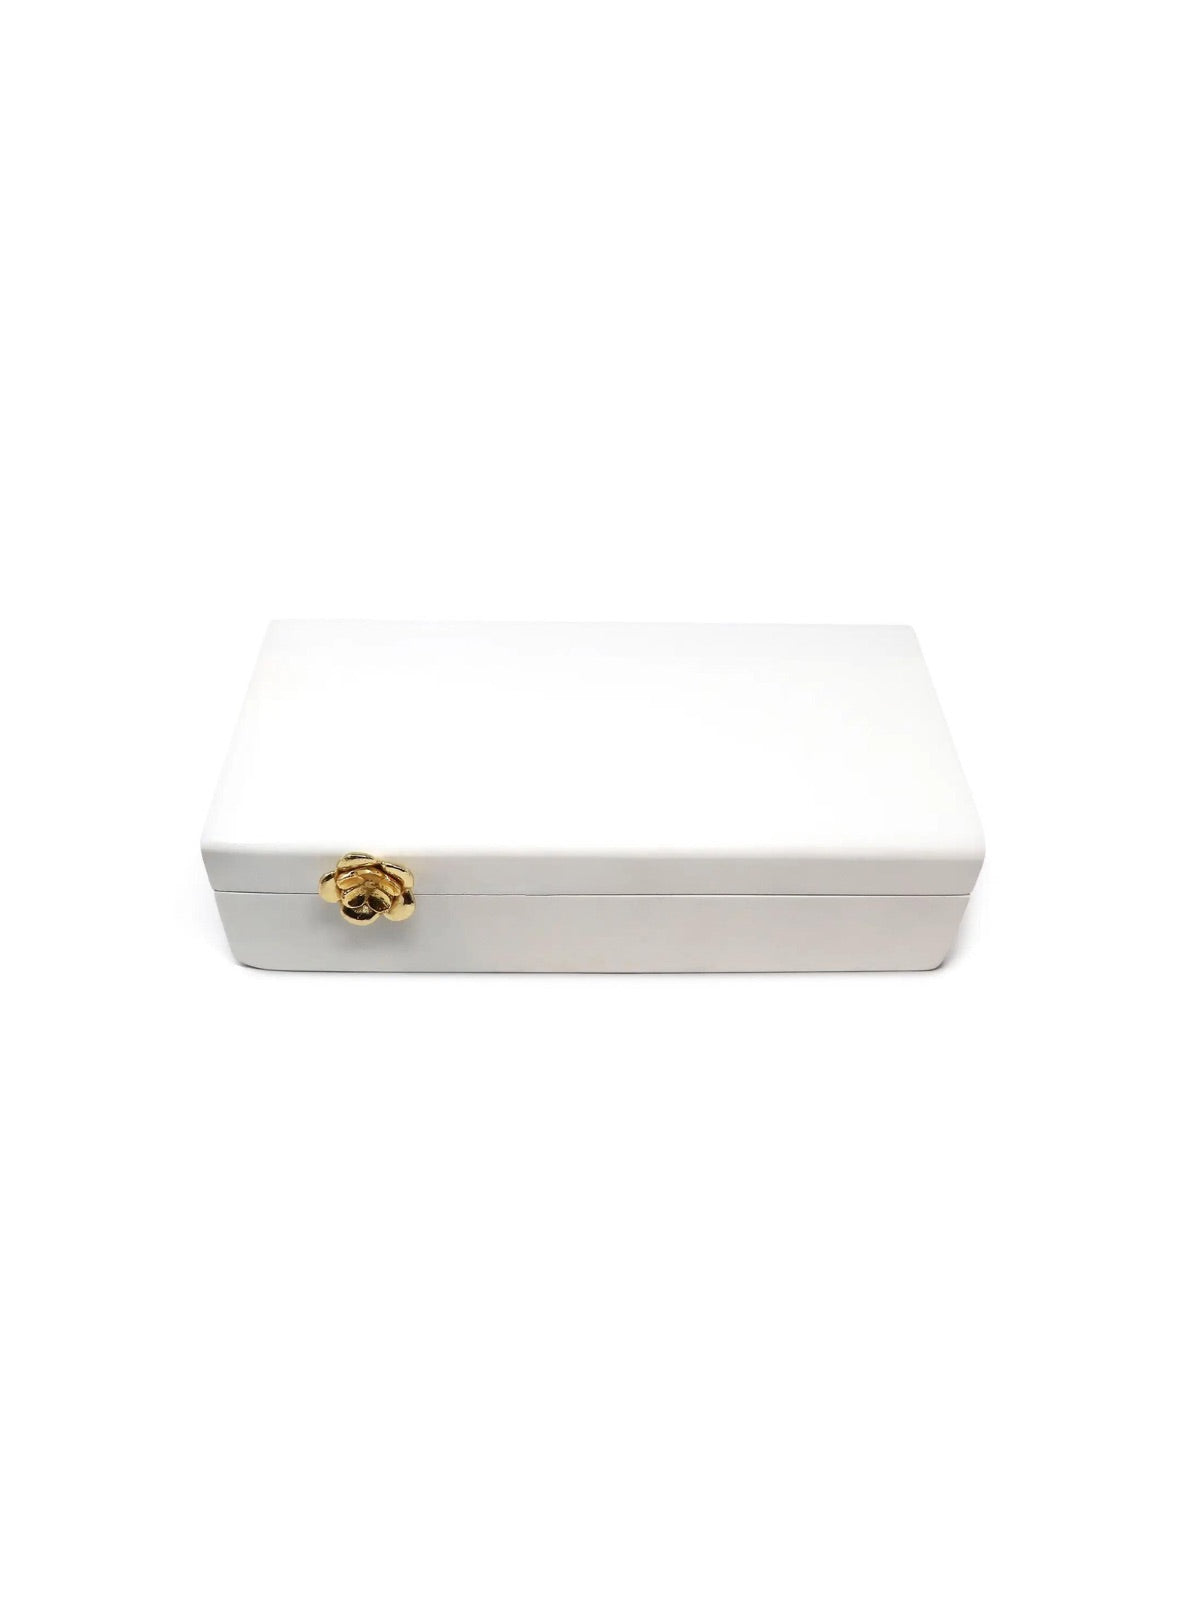 12 inch White Wood Decorative Box with Gold Flower Detail sold by KYA Home Decor.